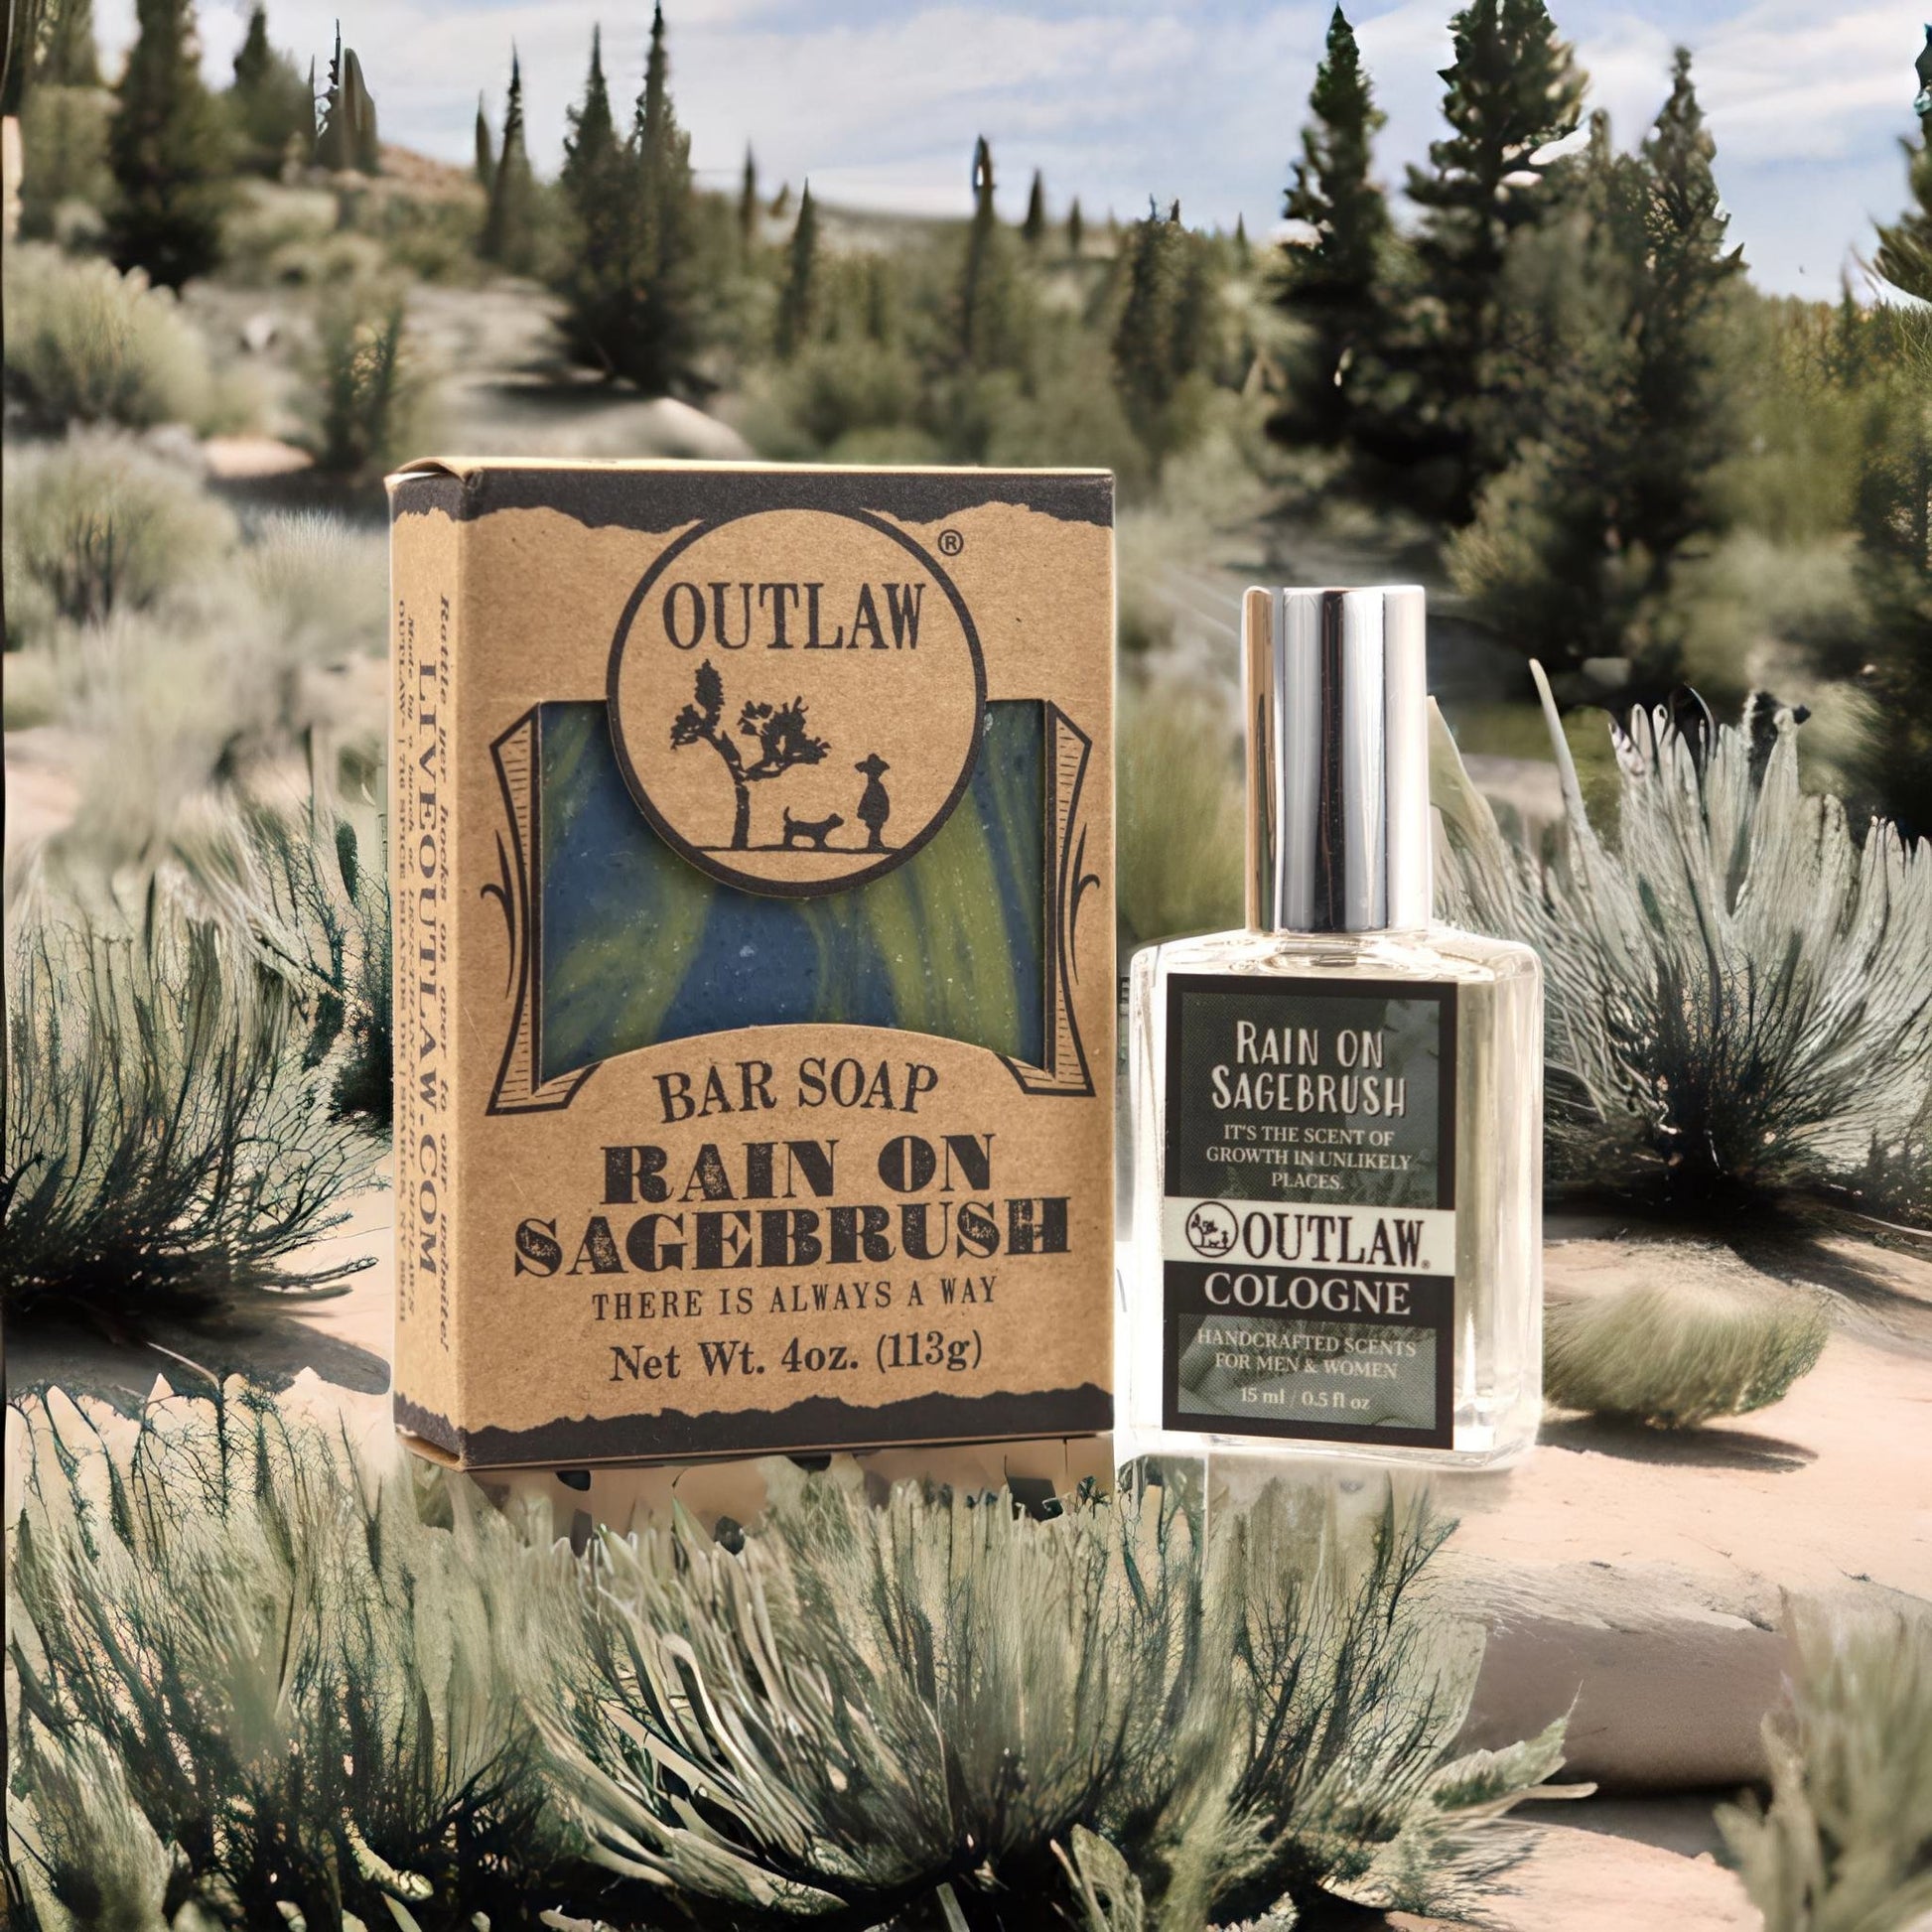 Unique Soap & Cologne Subscription - The Scent of the Month in a